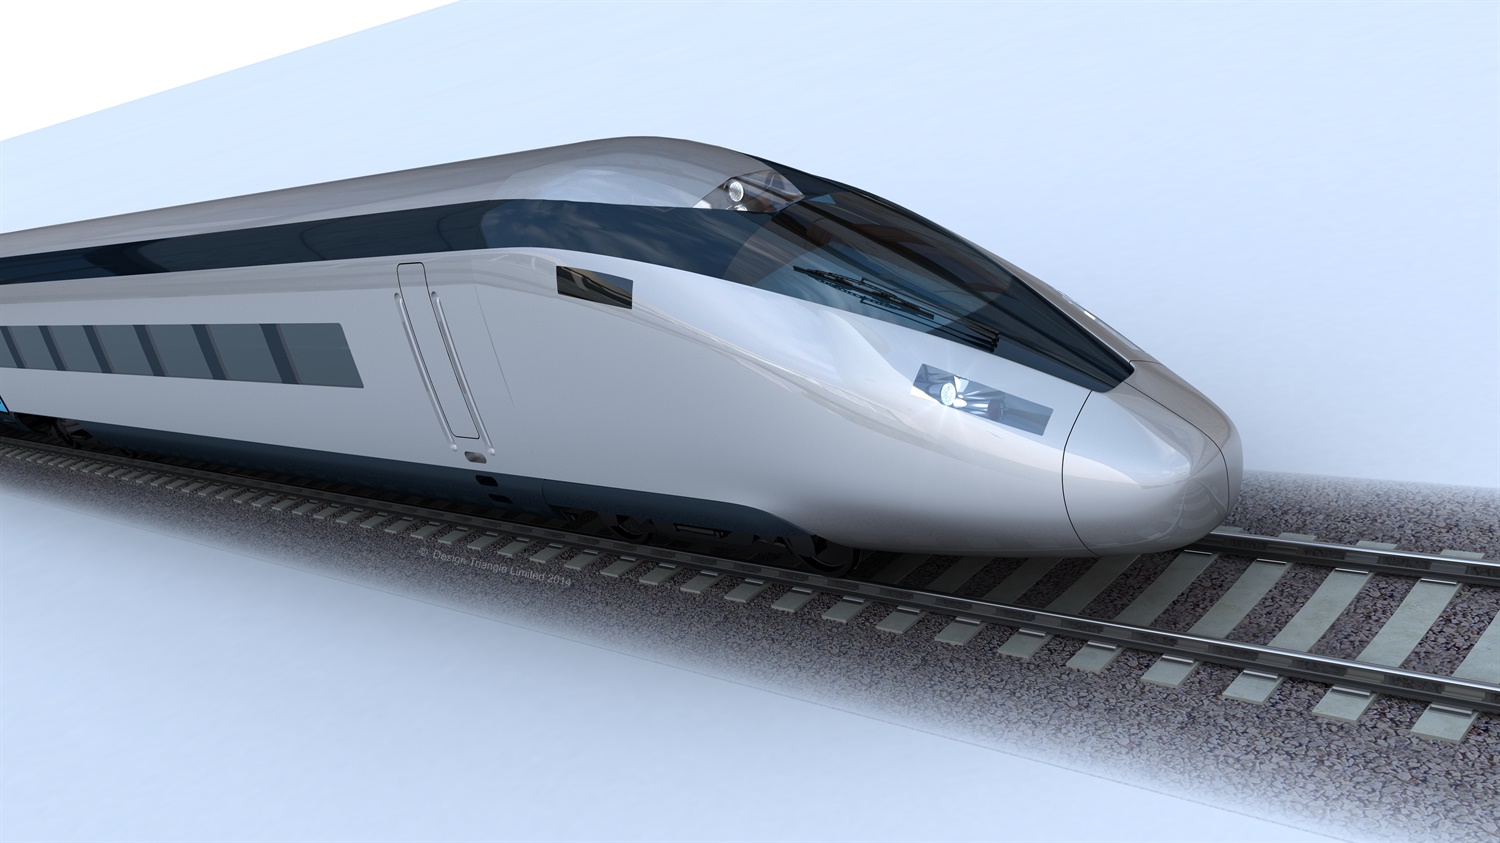 HS2 leaders urge NI companies to bid for £10bn phase 1 contracts